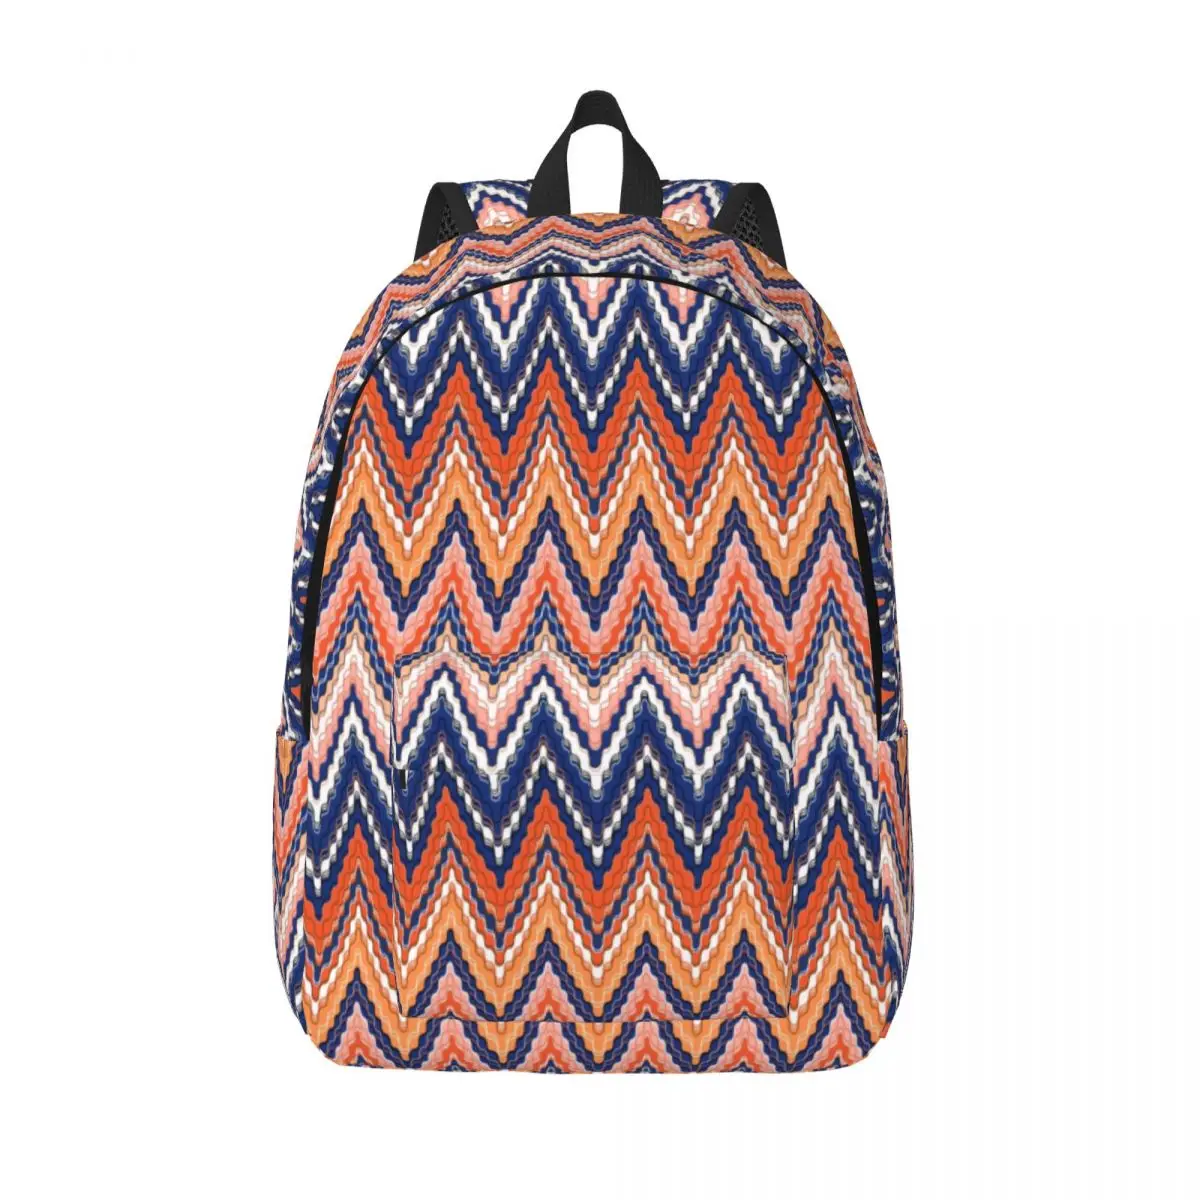 

Camouflage Zig Zag Abstract Laptop Backpack Women Men Casual Bookbag for School College Student Geometric Boho Zigzag Bag